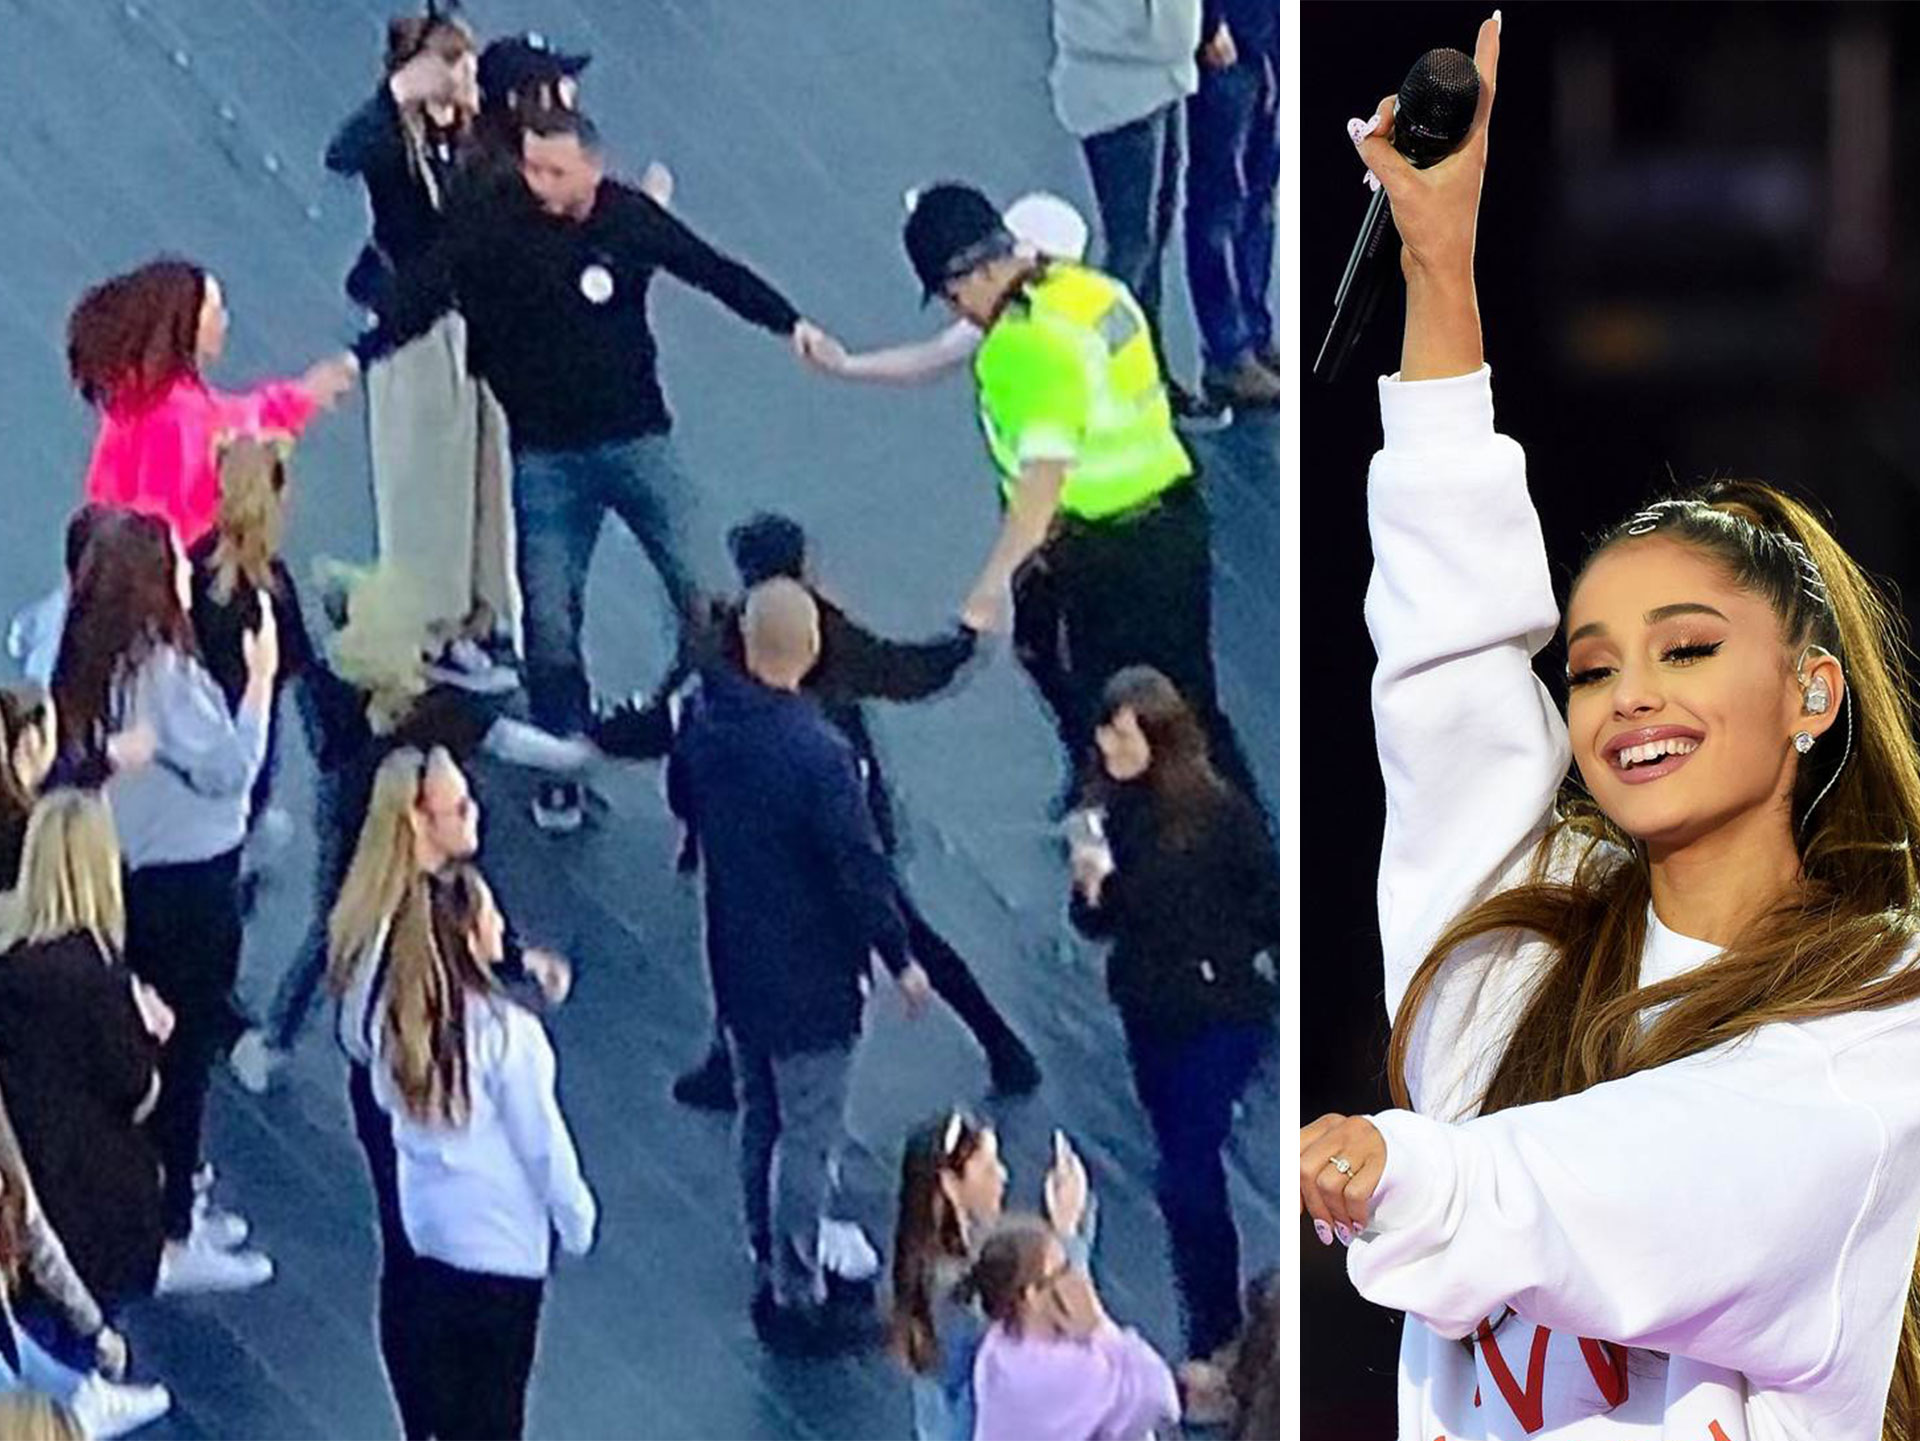 One Love Manchester dancing policeman speaks out about the emotional concert